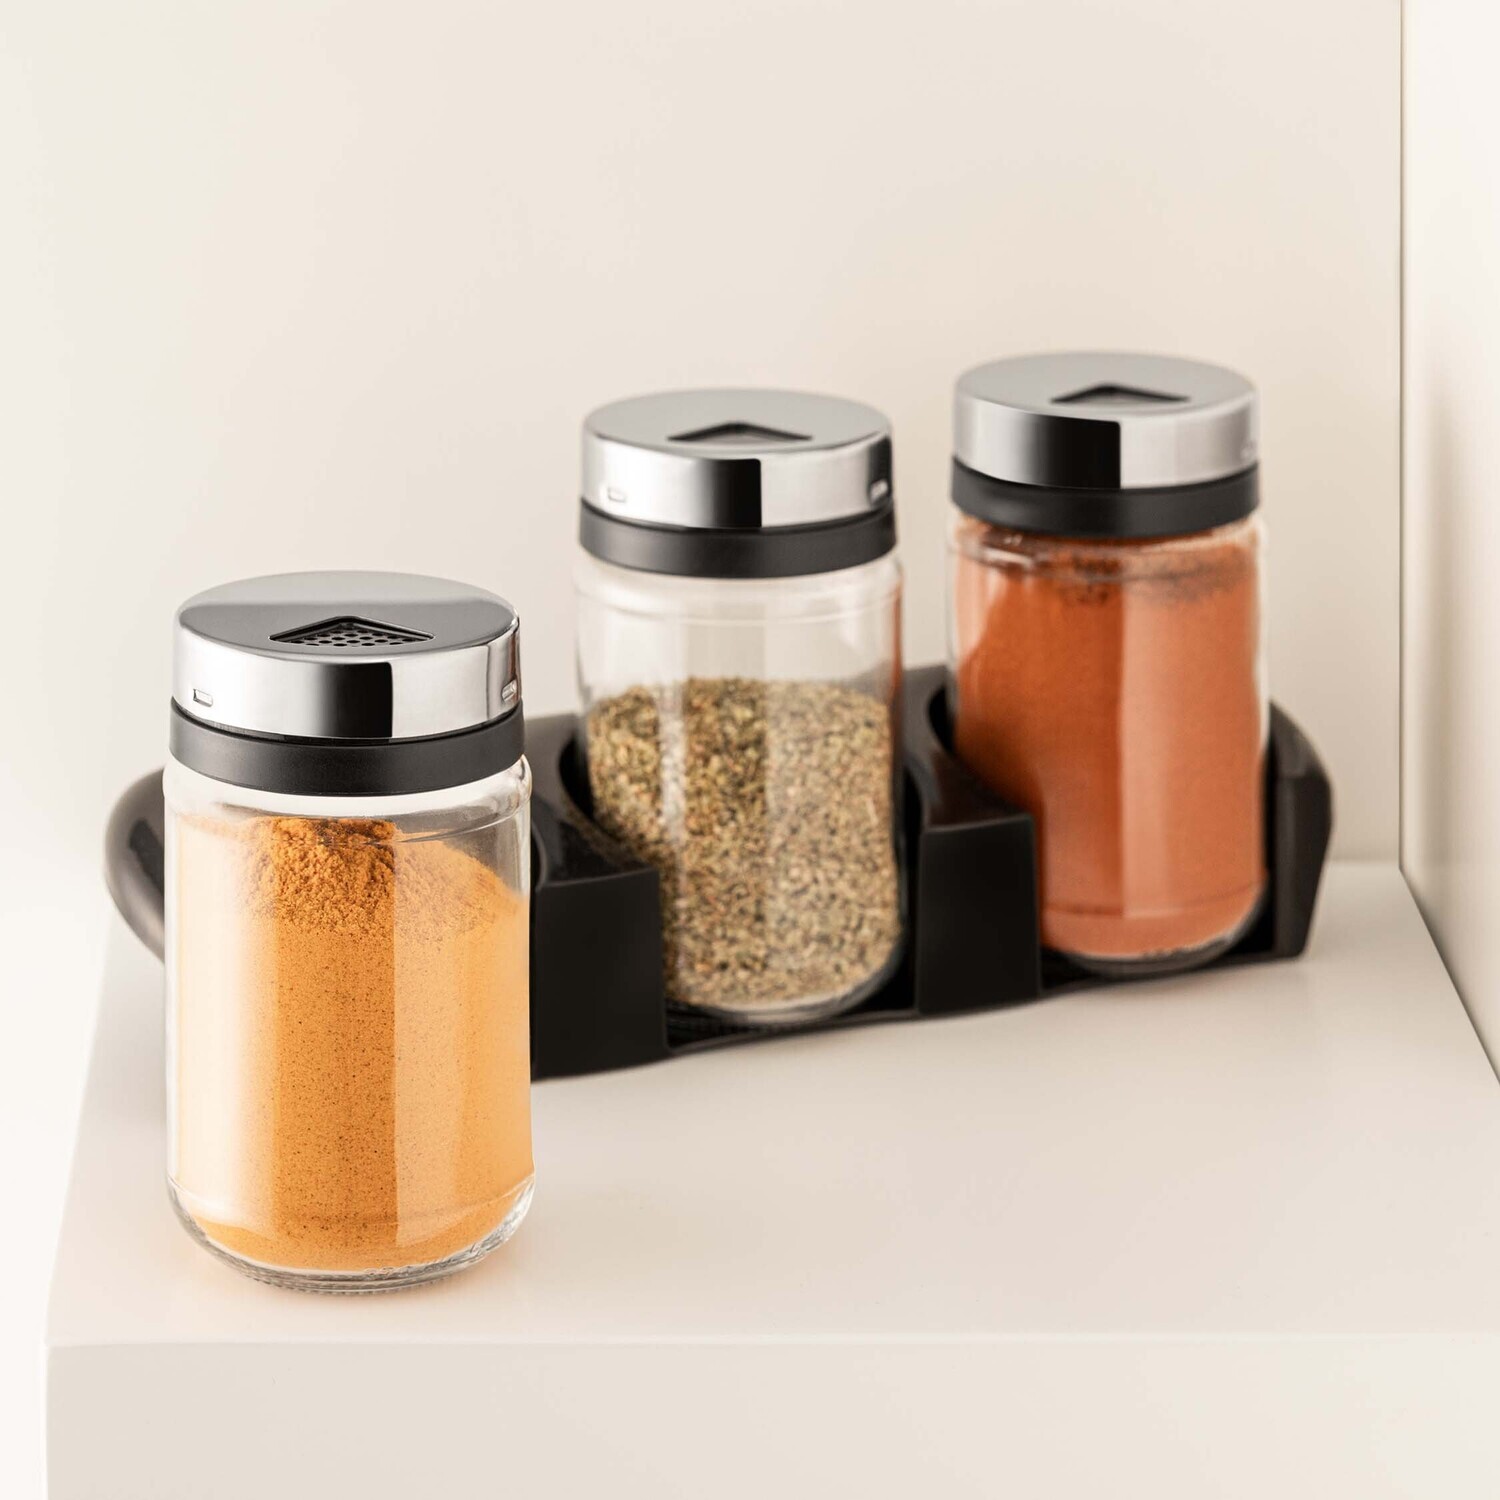 Qlux 3pc Spice Shaker with holder Premium glass/stainless steel shaker 330ml C-00340